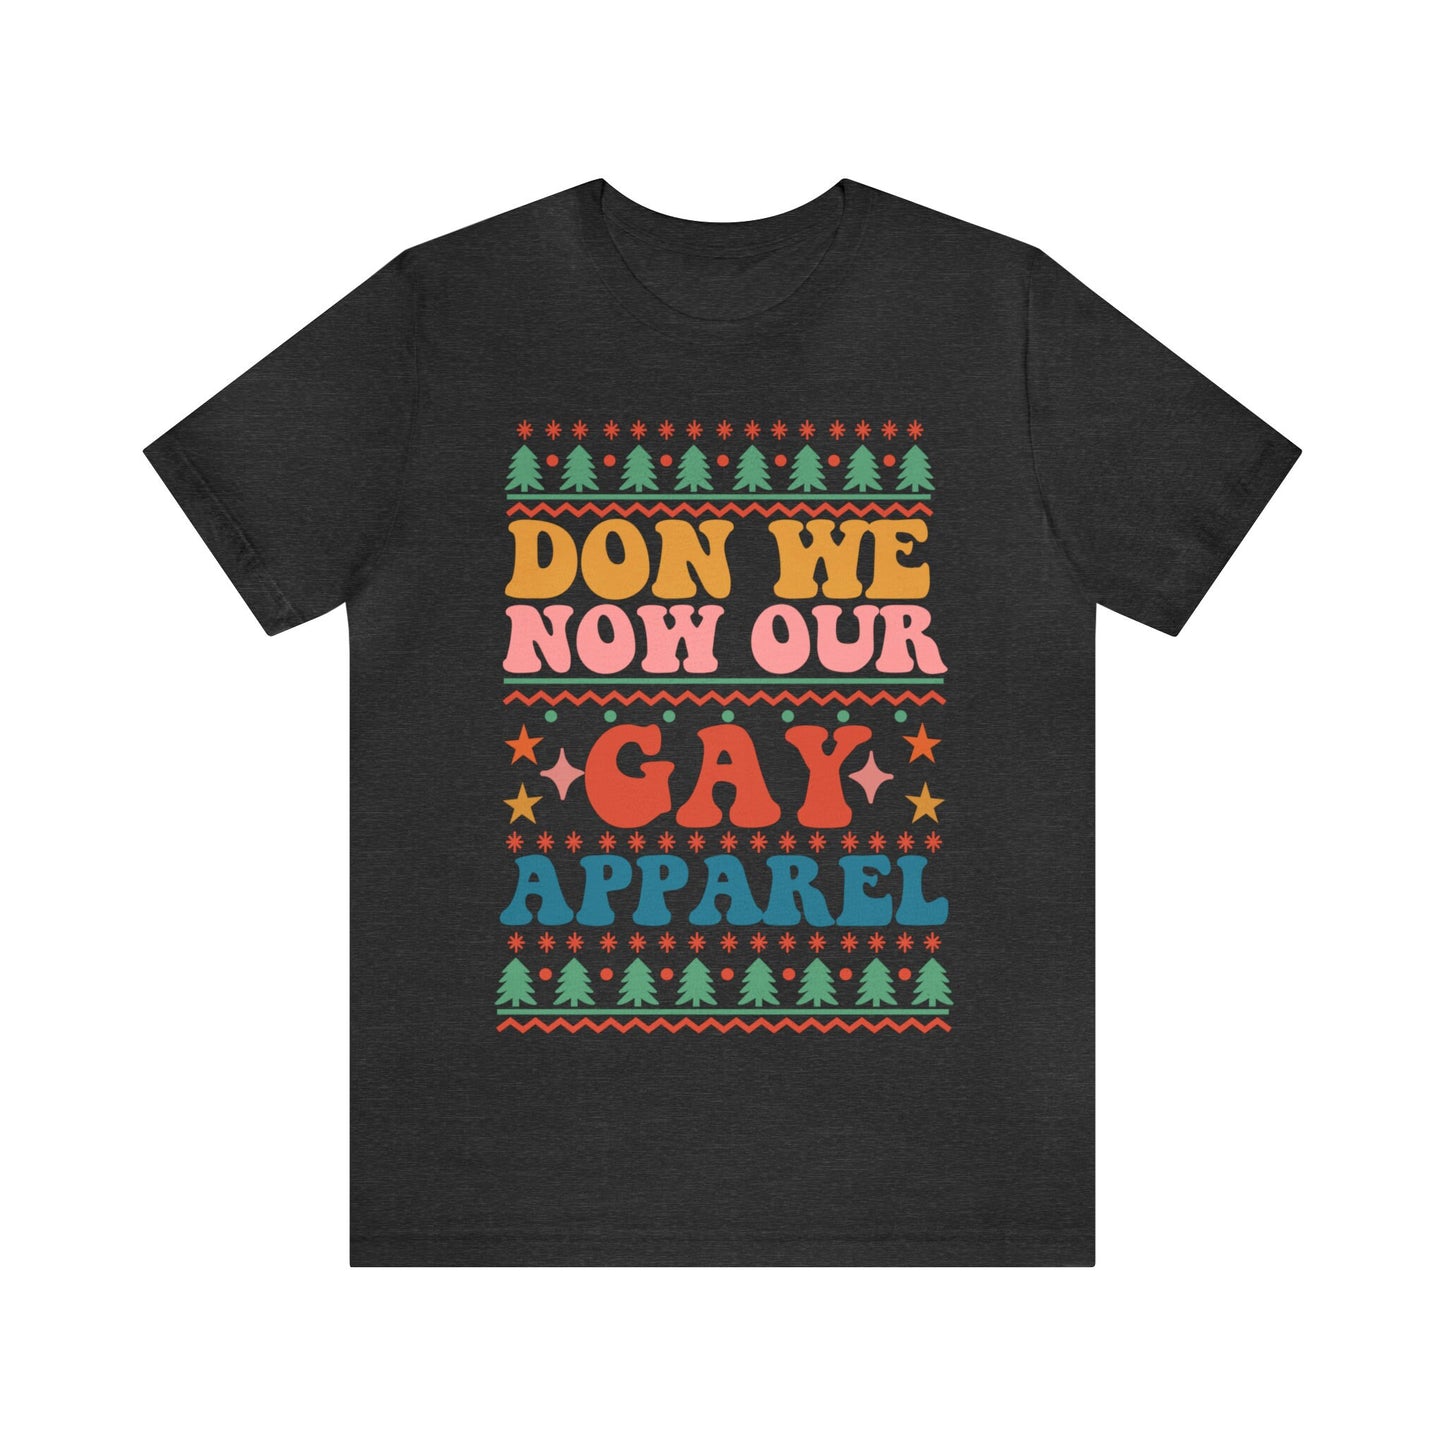 Don we now our gay apparel shirt